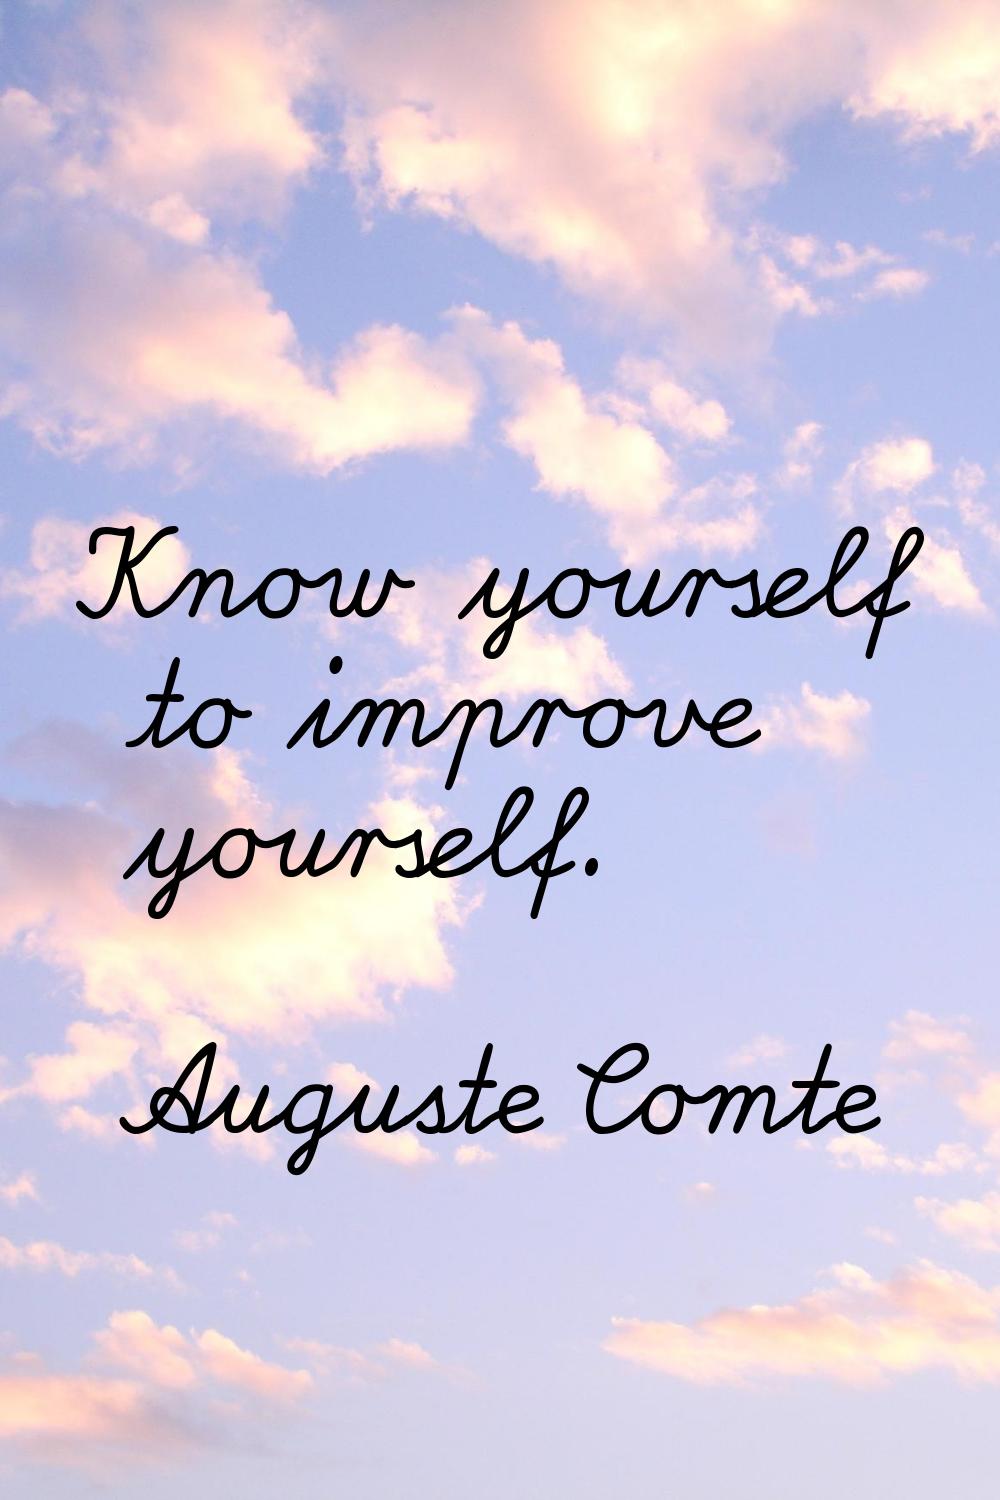 Know yourself to improve yourself.